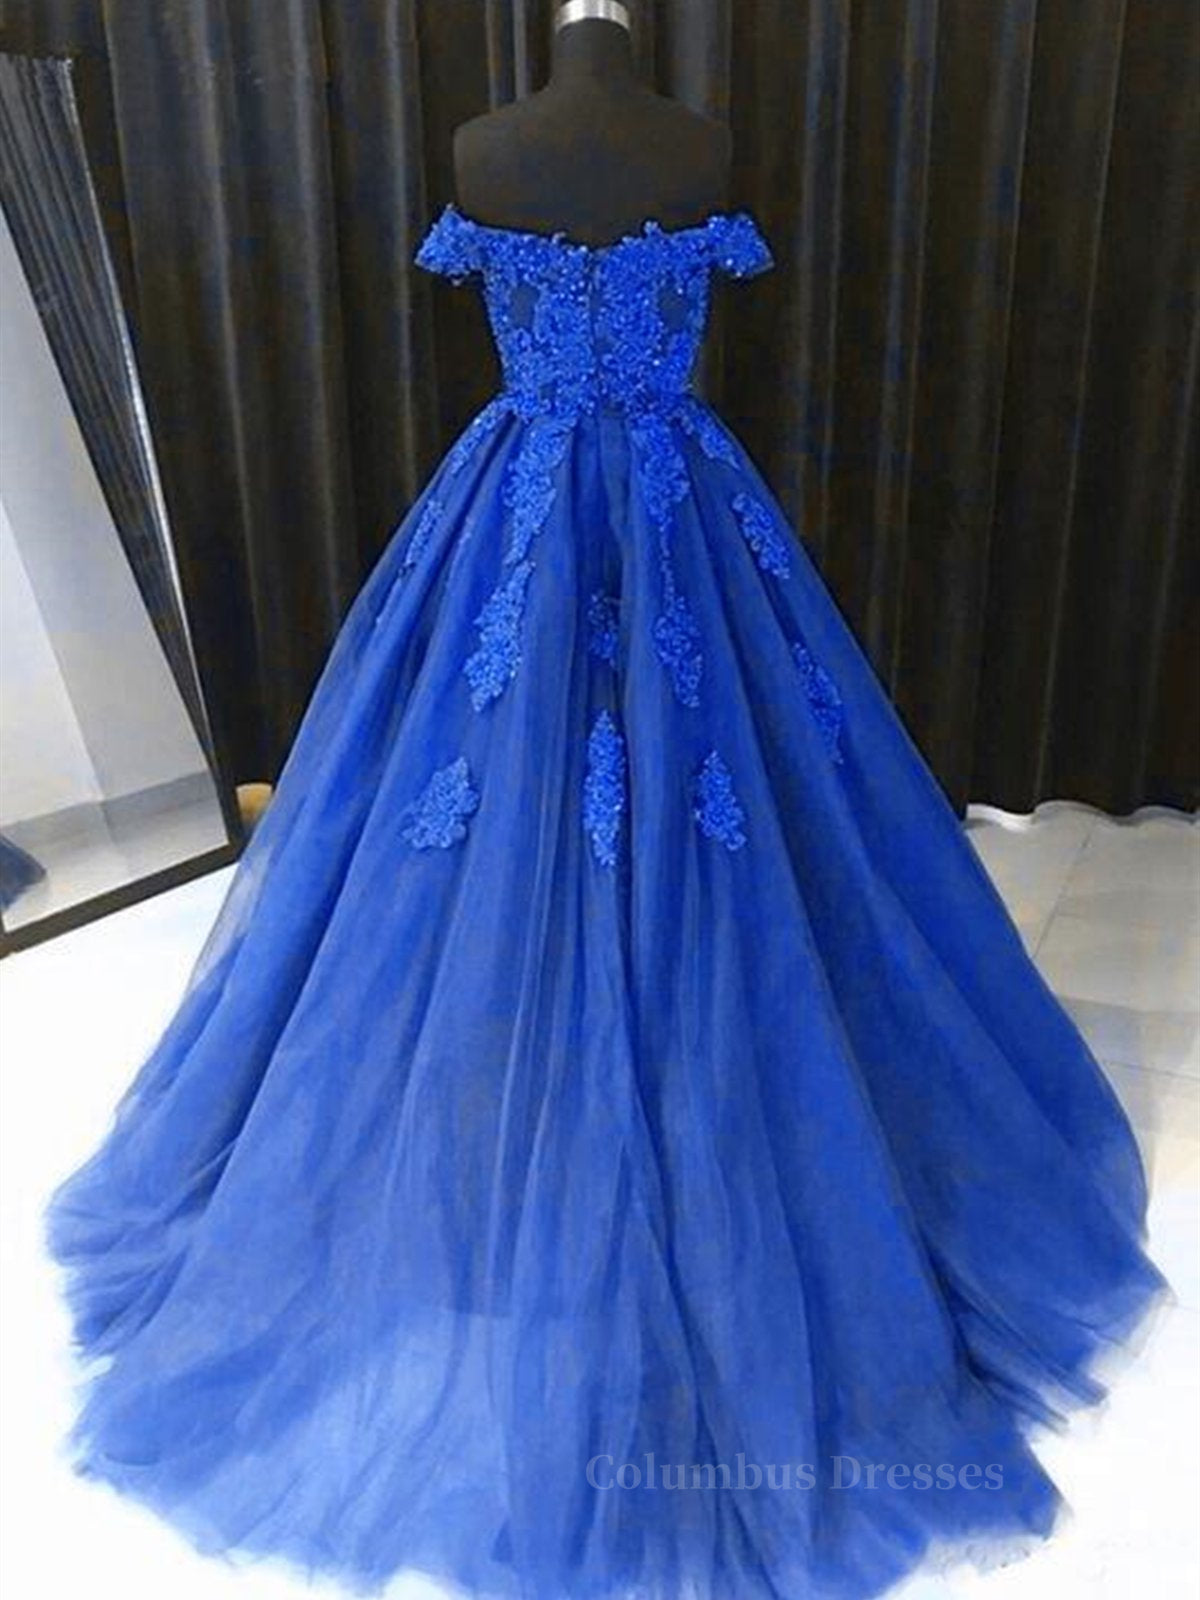 Homecoming Dress Shopping Near Me, Off the Shouler Royal Blue Lace Prom Dresses, Off Shoulder Blue Lace Formal Evening Dresses